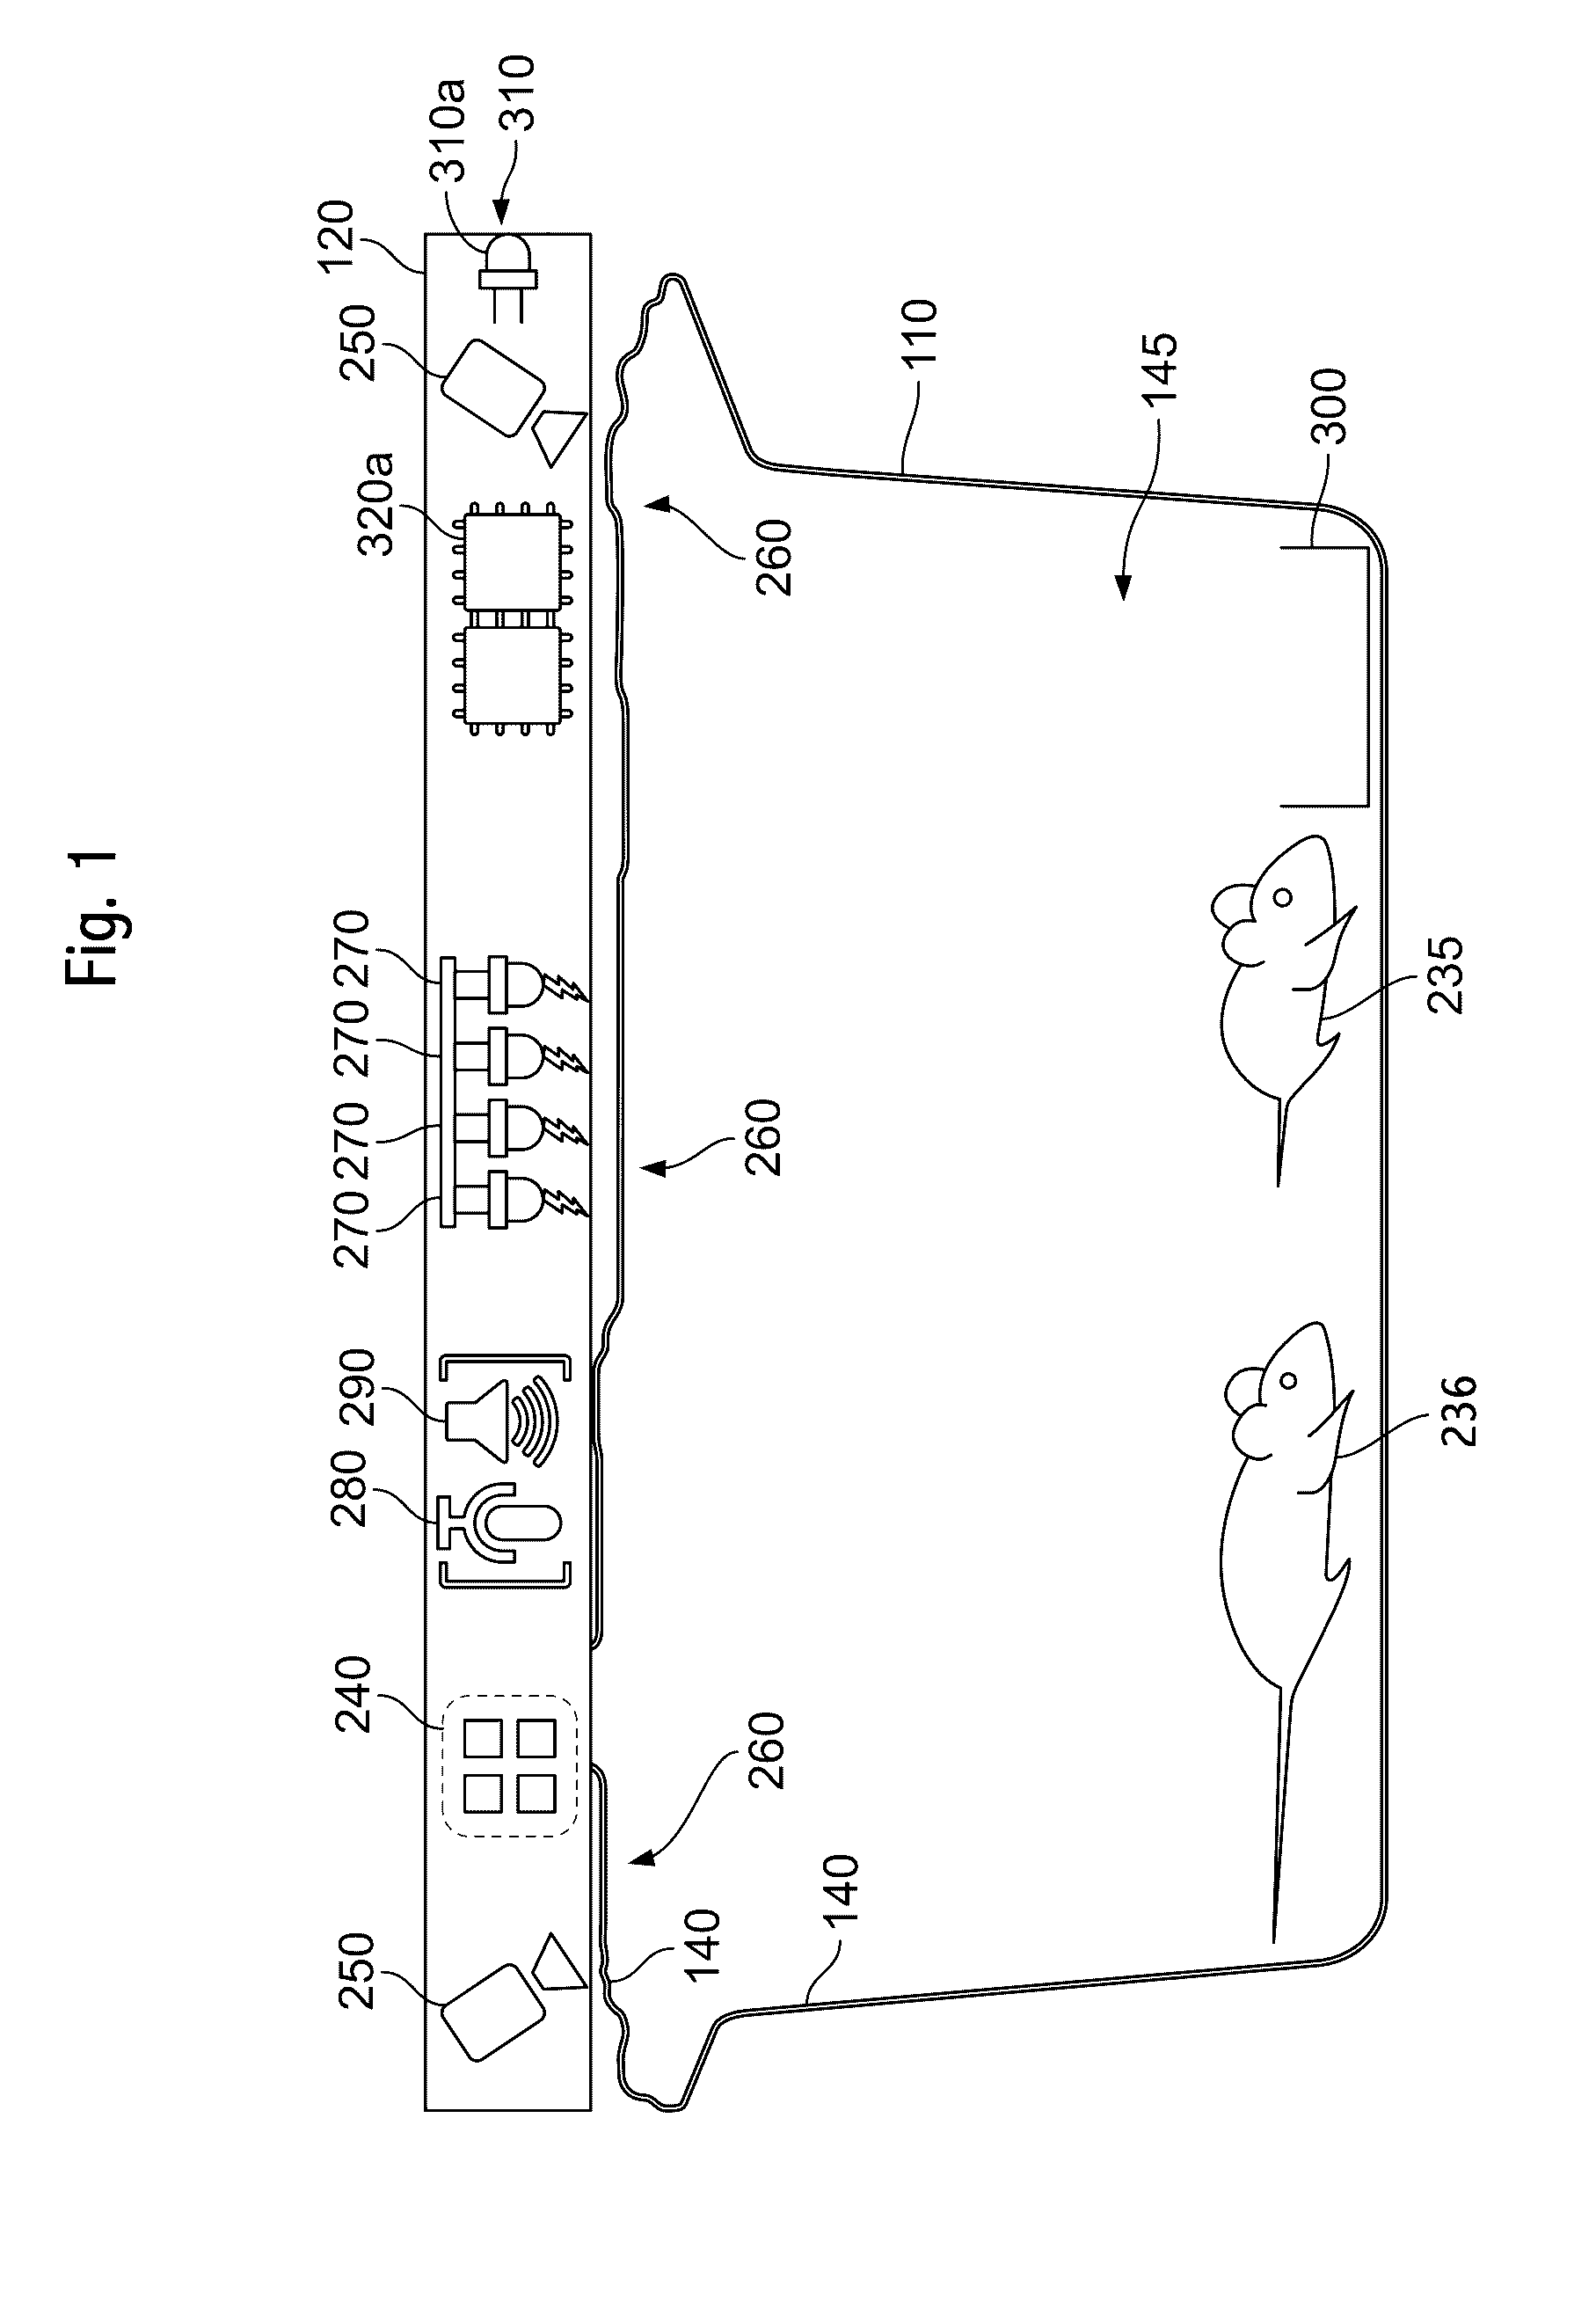 System and method of measuring efficacy of cancer therapeutics